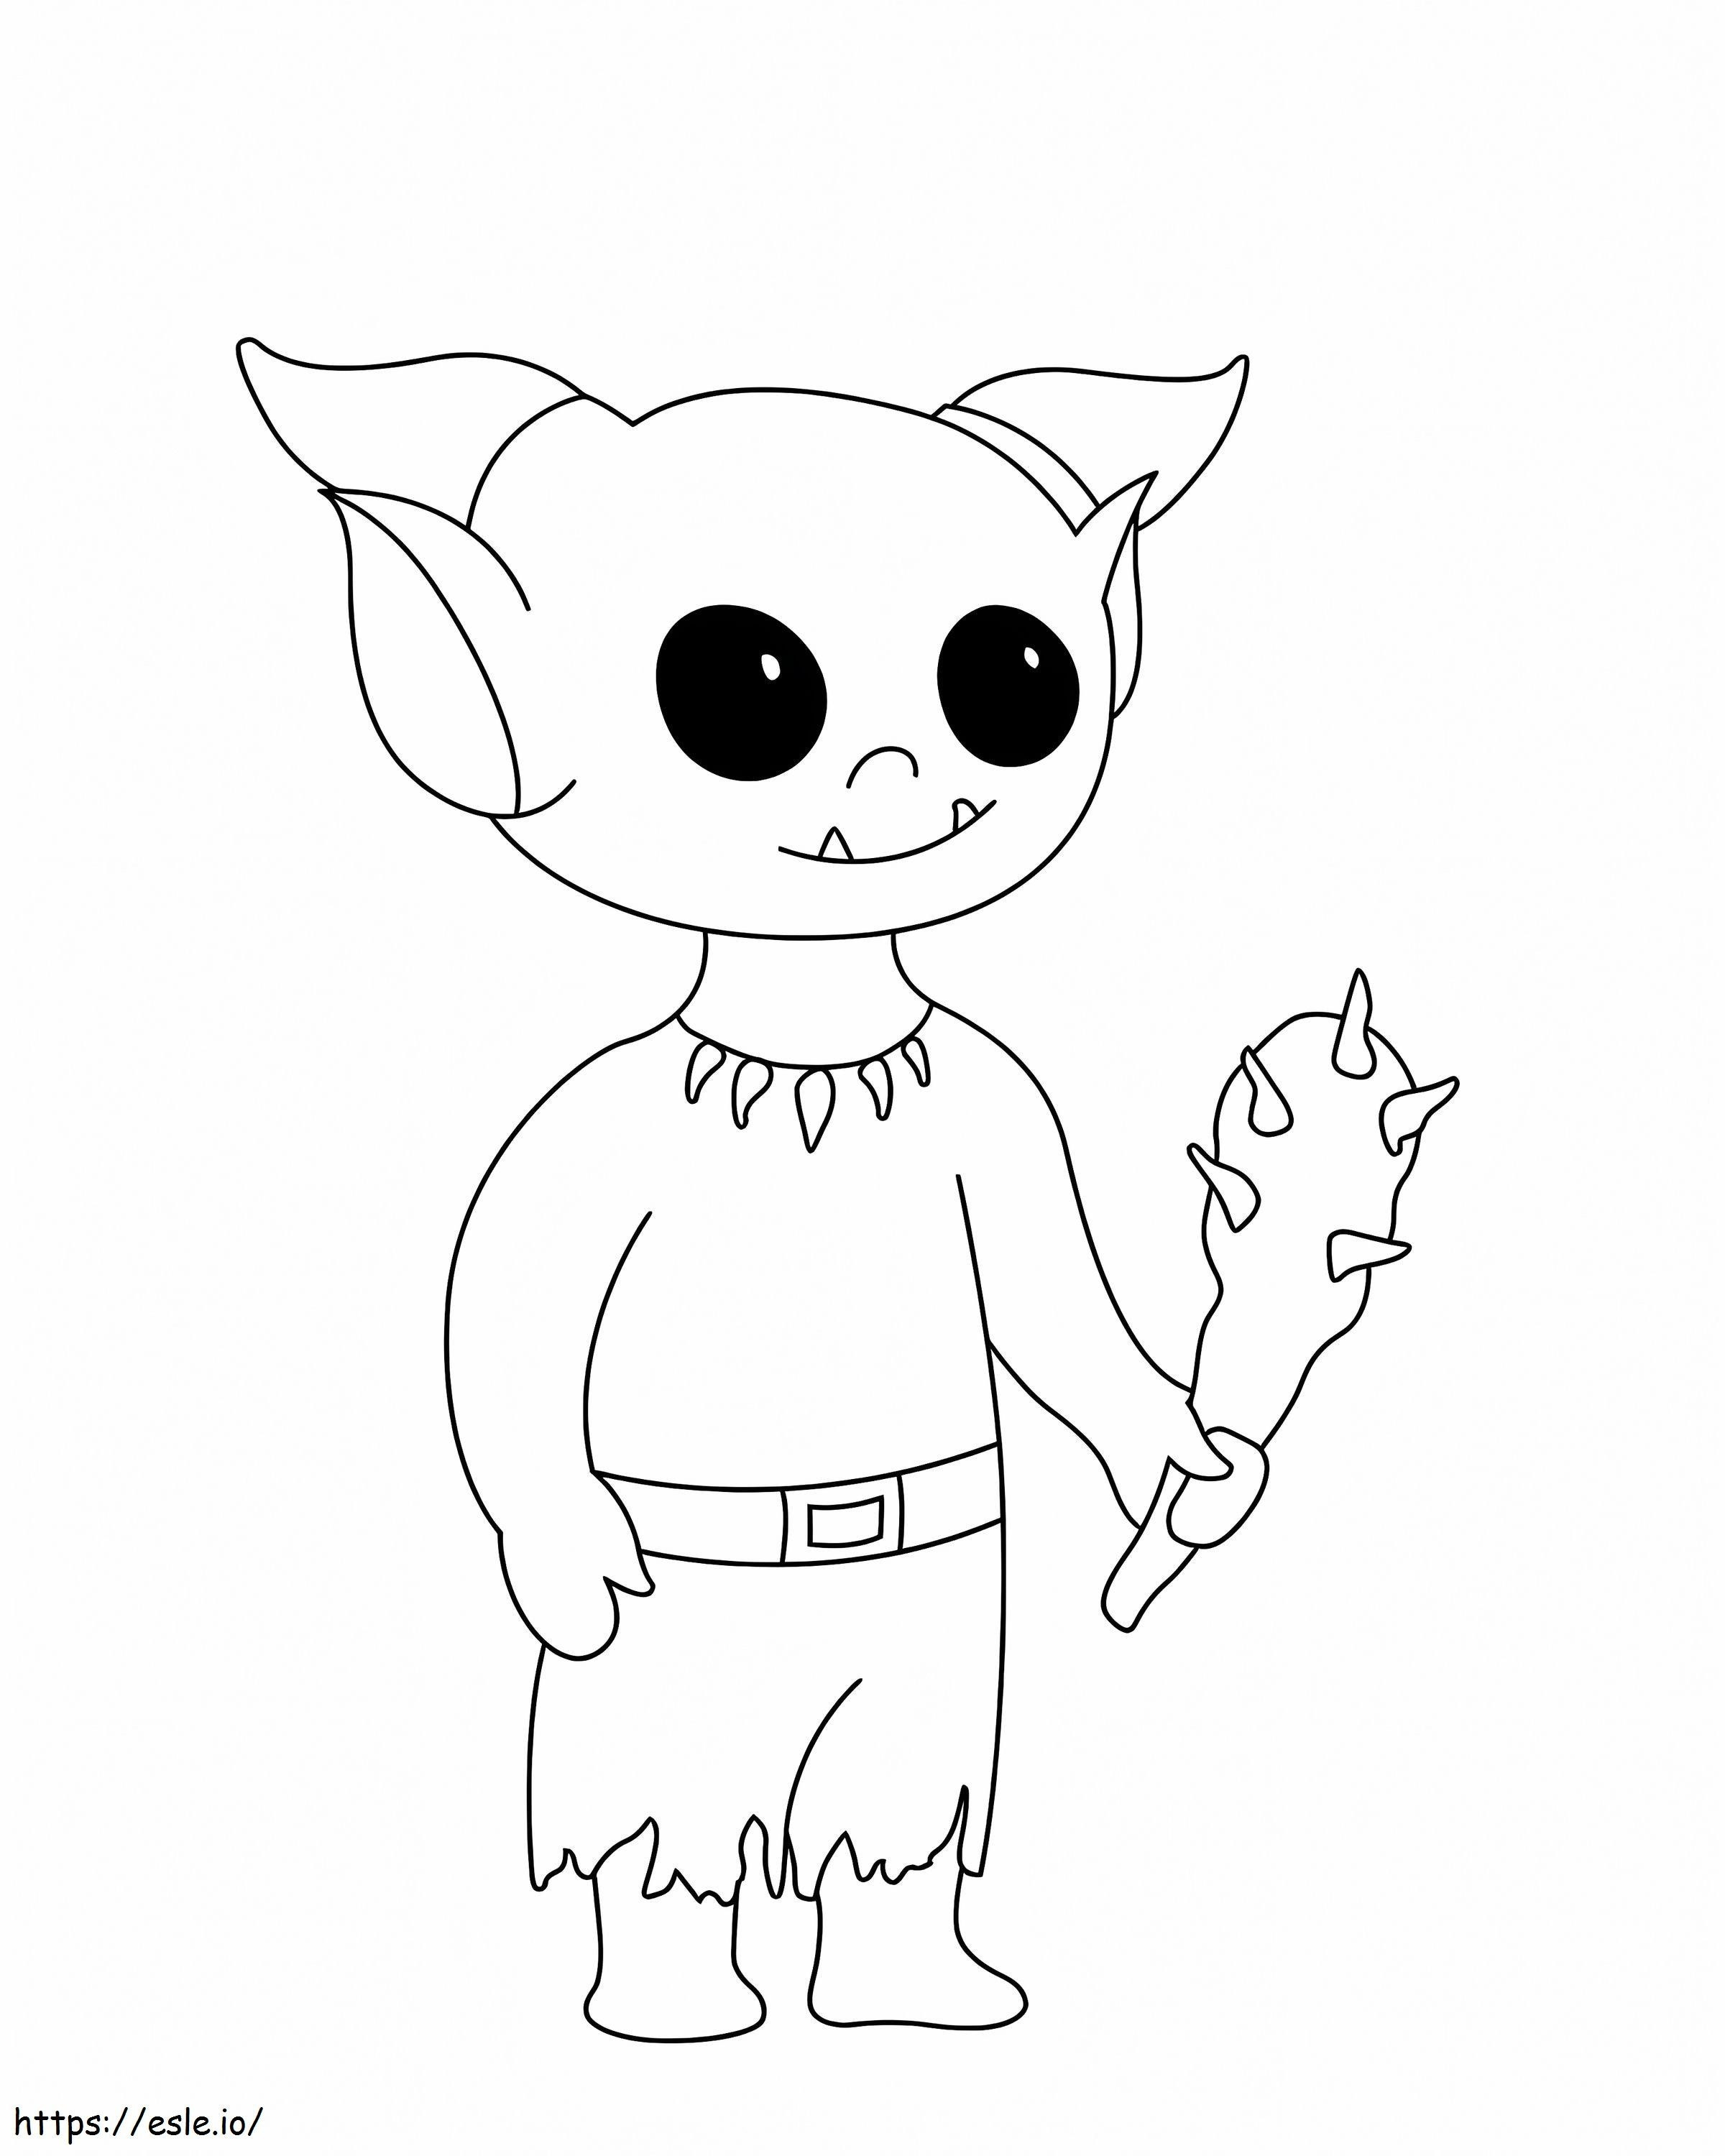 Smiling Goblin Holding A Spiked Club coloring page